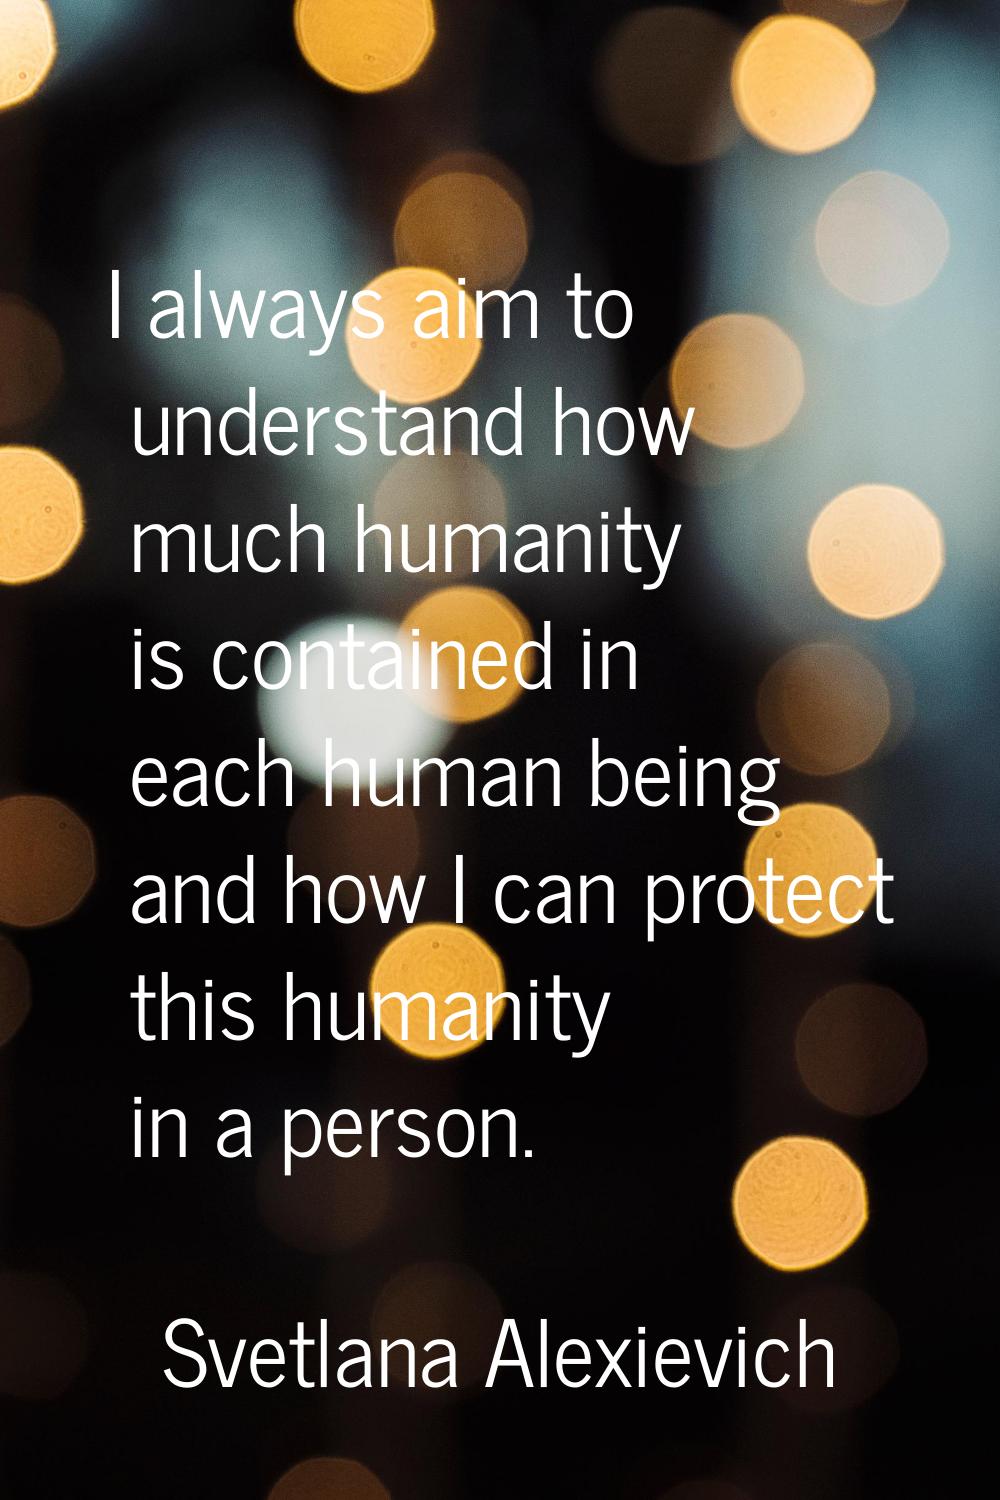 I always aim to understand how much humanity is contained in each human being and how I can protect